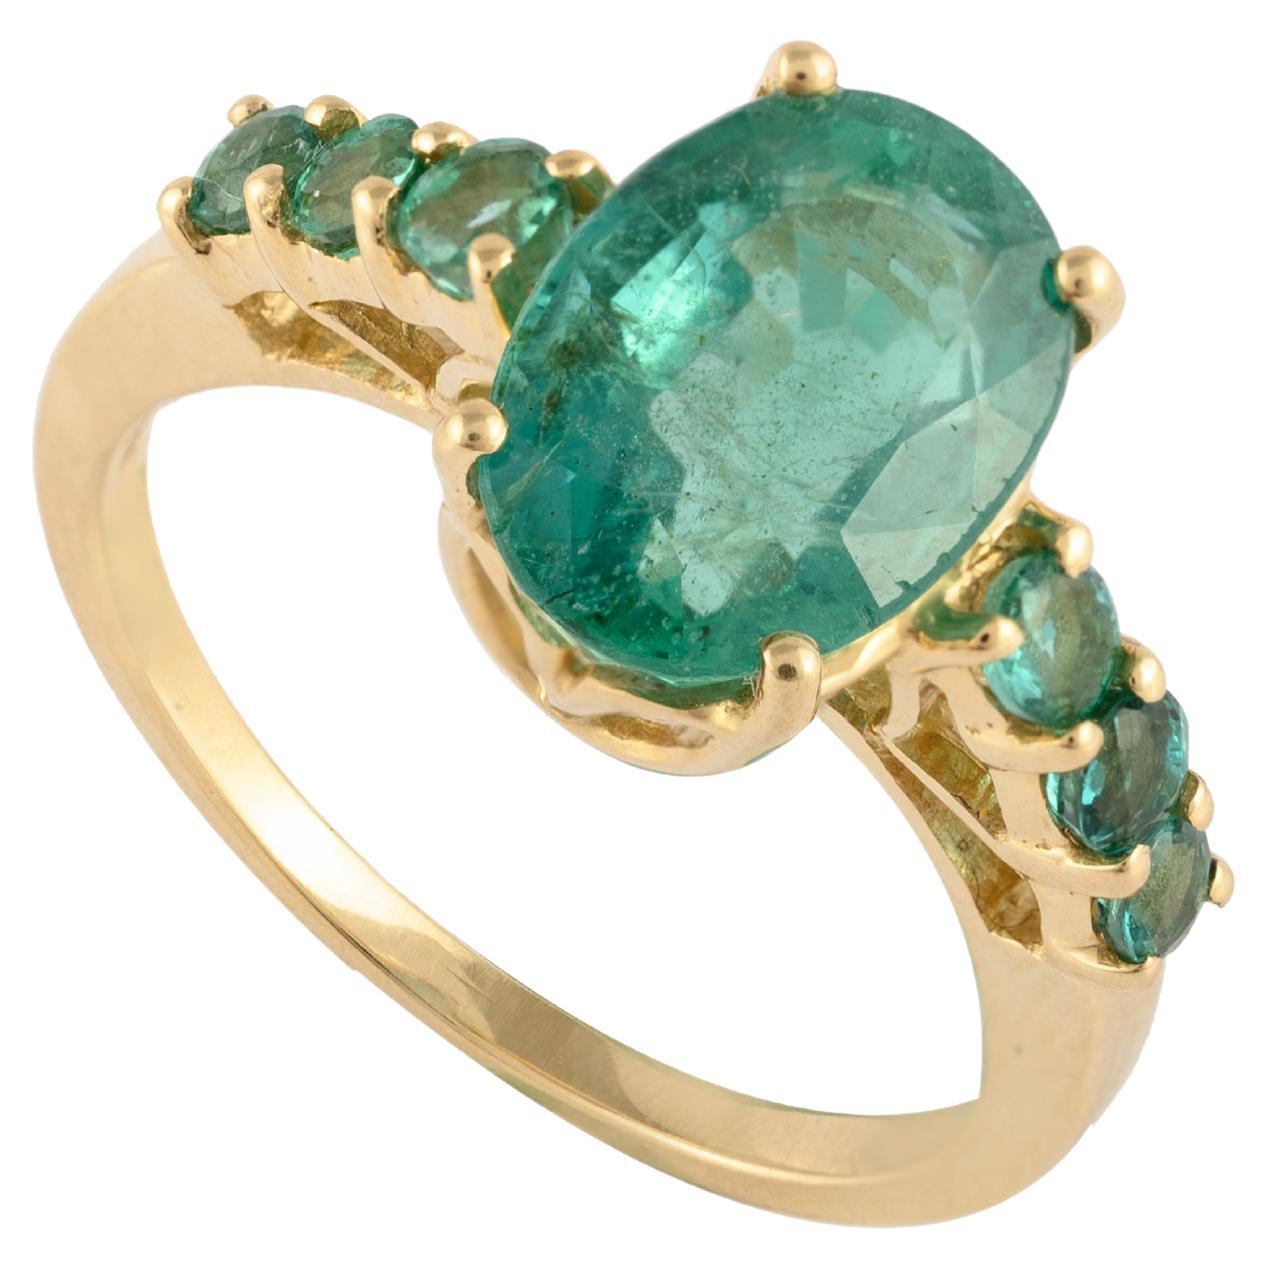 For Sale:  3.09 Carat Genuine Emerald Ring Handcrafted in 14k Solid Yellow Gold